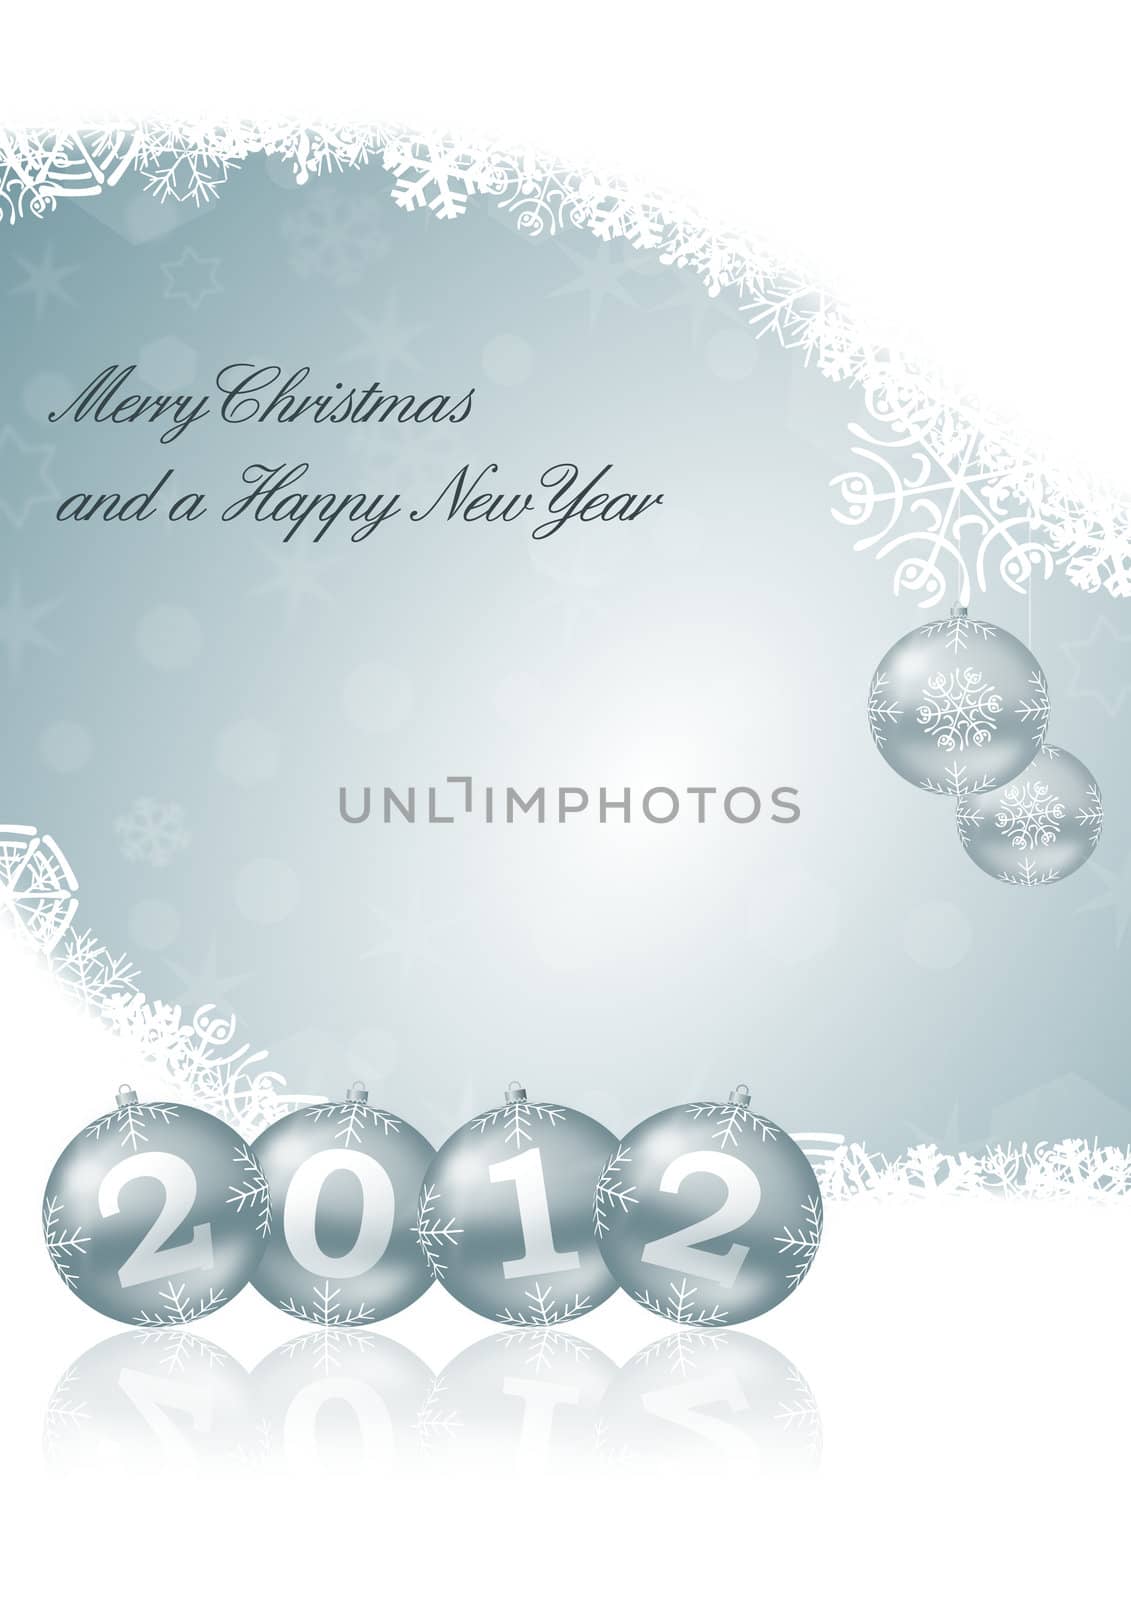 Merry Christmas and a Happy New Year illustration with snowflakes and christmas balls by alexwhite